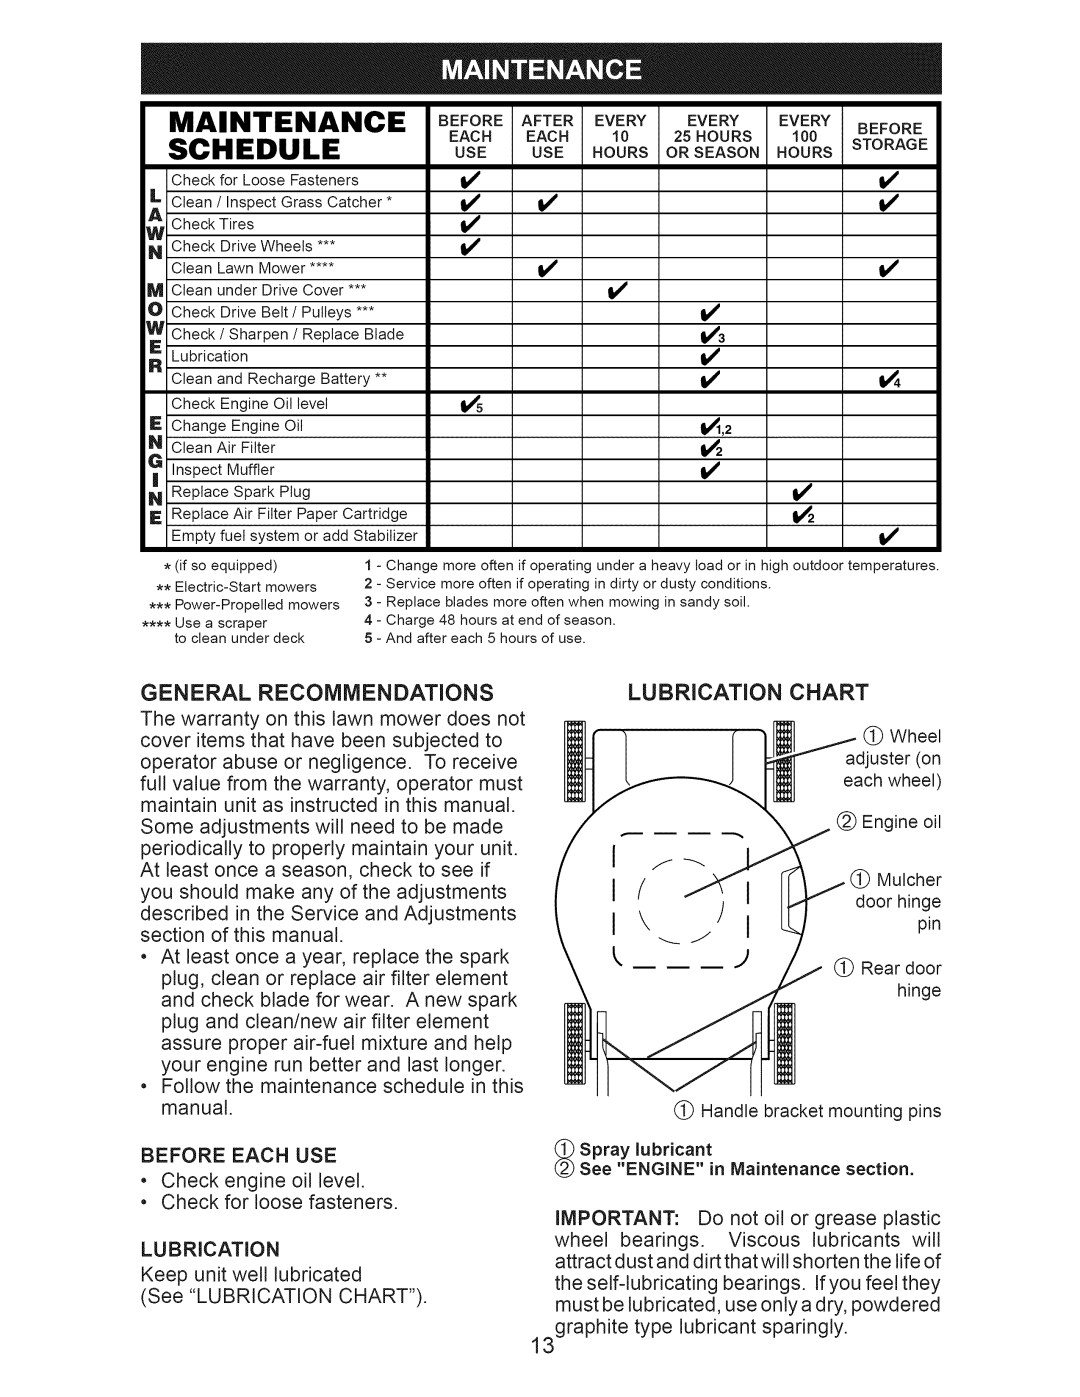 Craftsman 917.374365 owner manual Maintenance, Schedule, Use Hours 